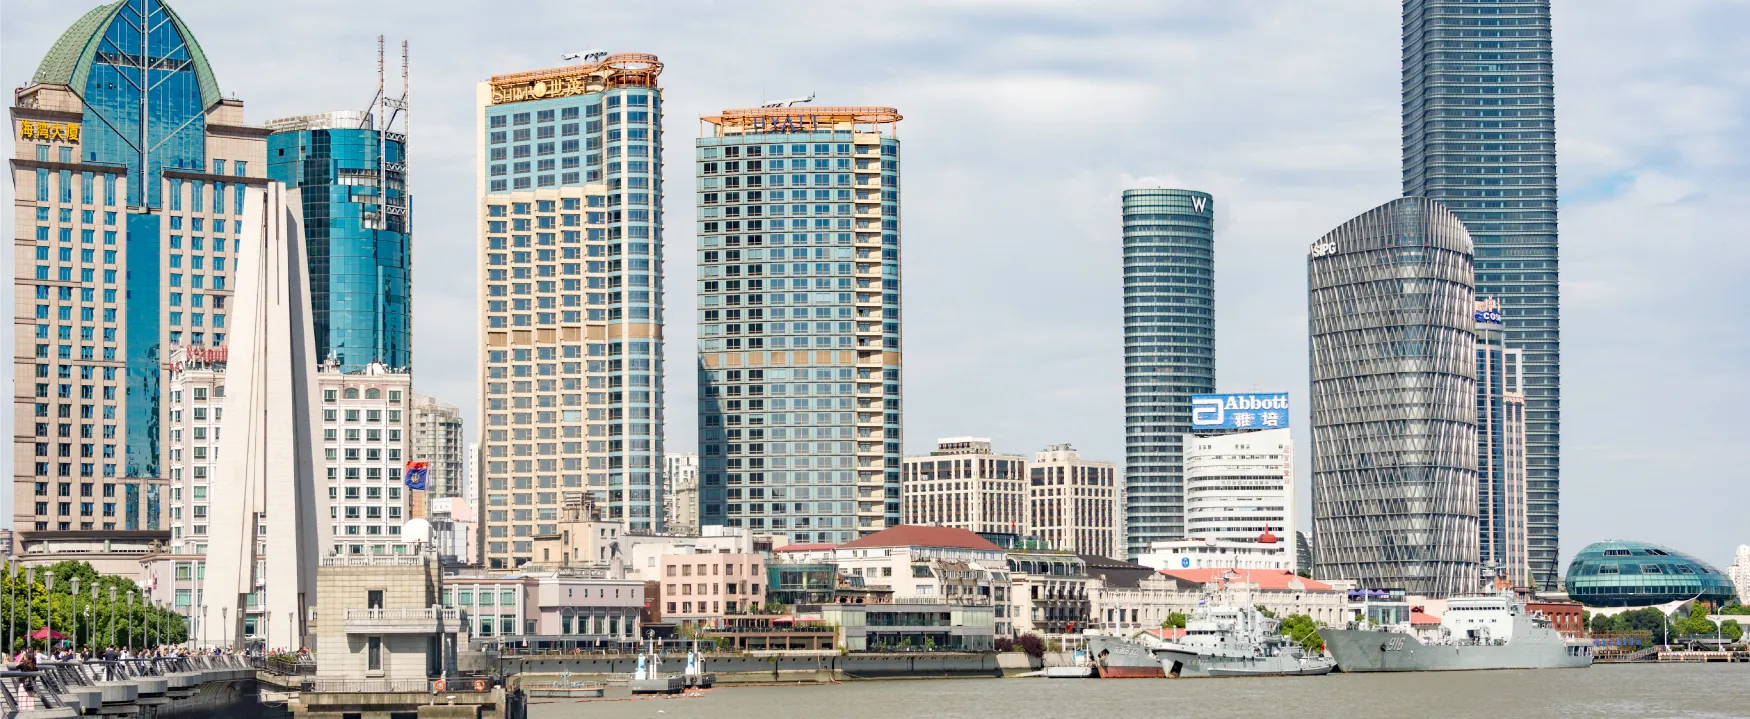 A photograph shows a port city skyline, where the buildings all appear to be very new, and very sleek.